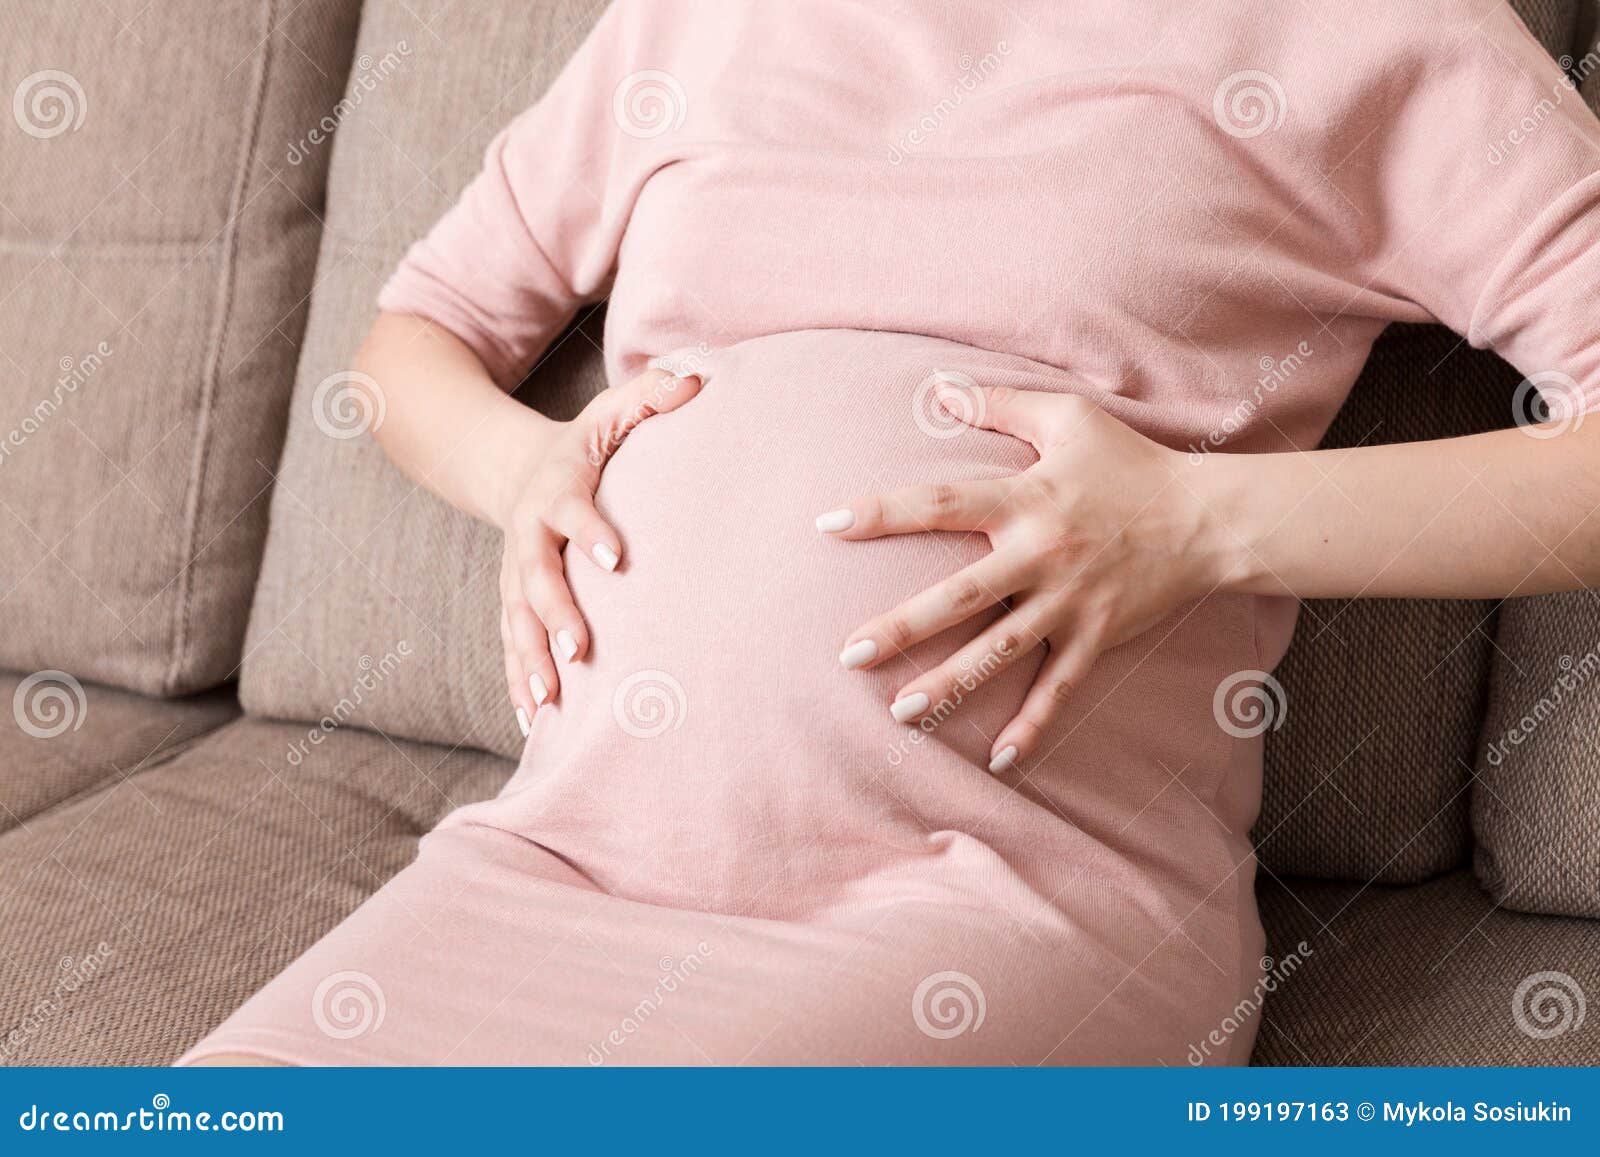 https://thumbs.dreamstime.com/z/pregnant-lady-having-massaging-lower-belly-sitting-sofa-indoor-pregnancy-problems-concept-maternity-healthcare-pregnant-lady-199197163.jpg